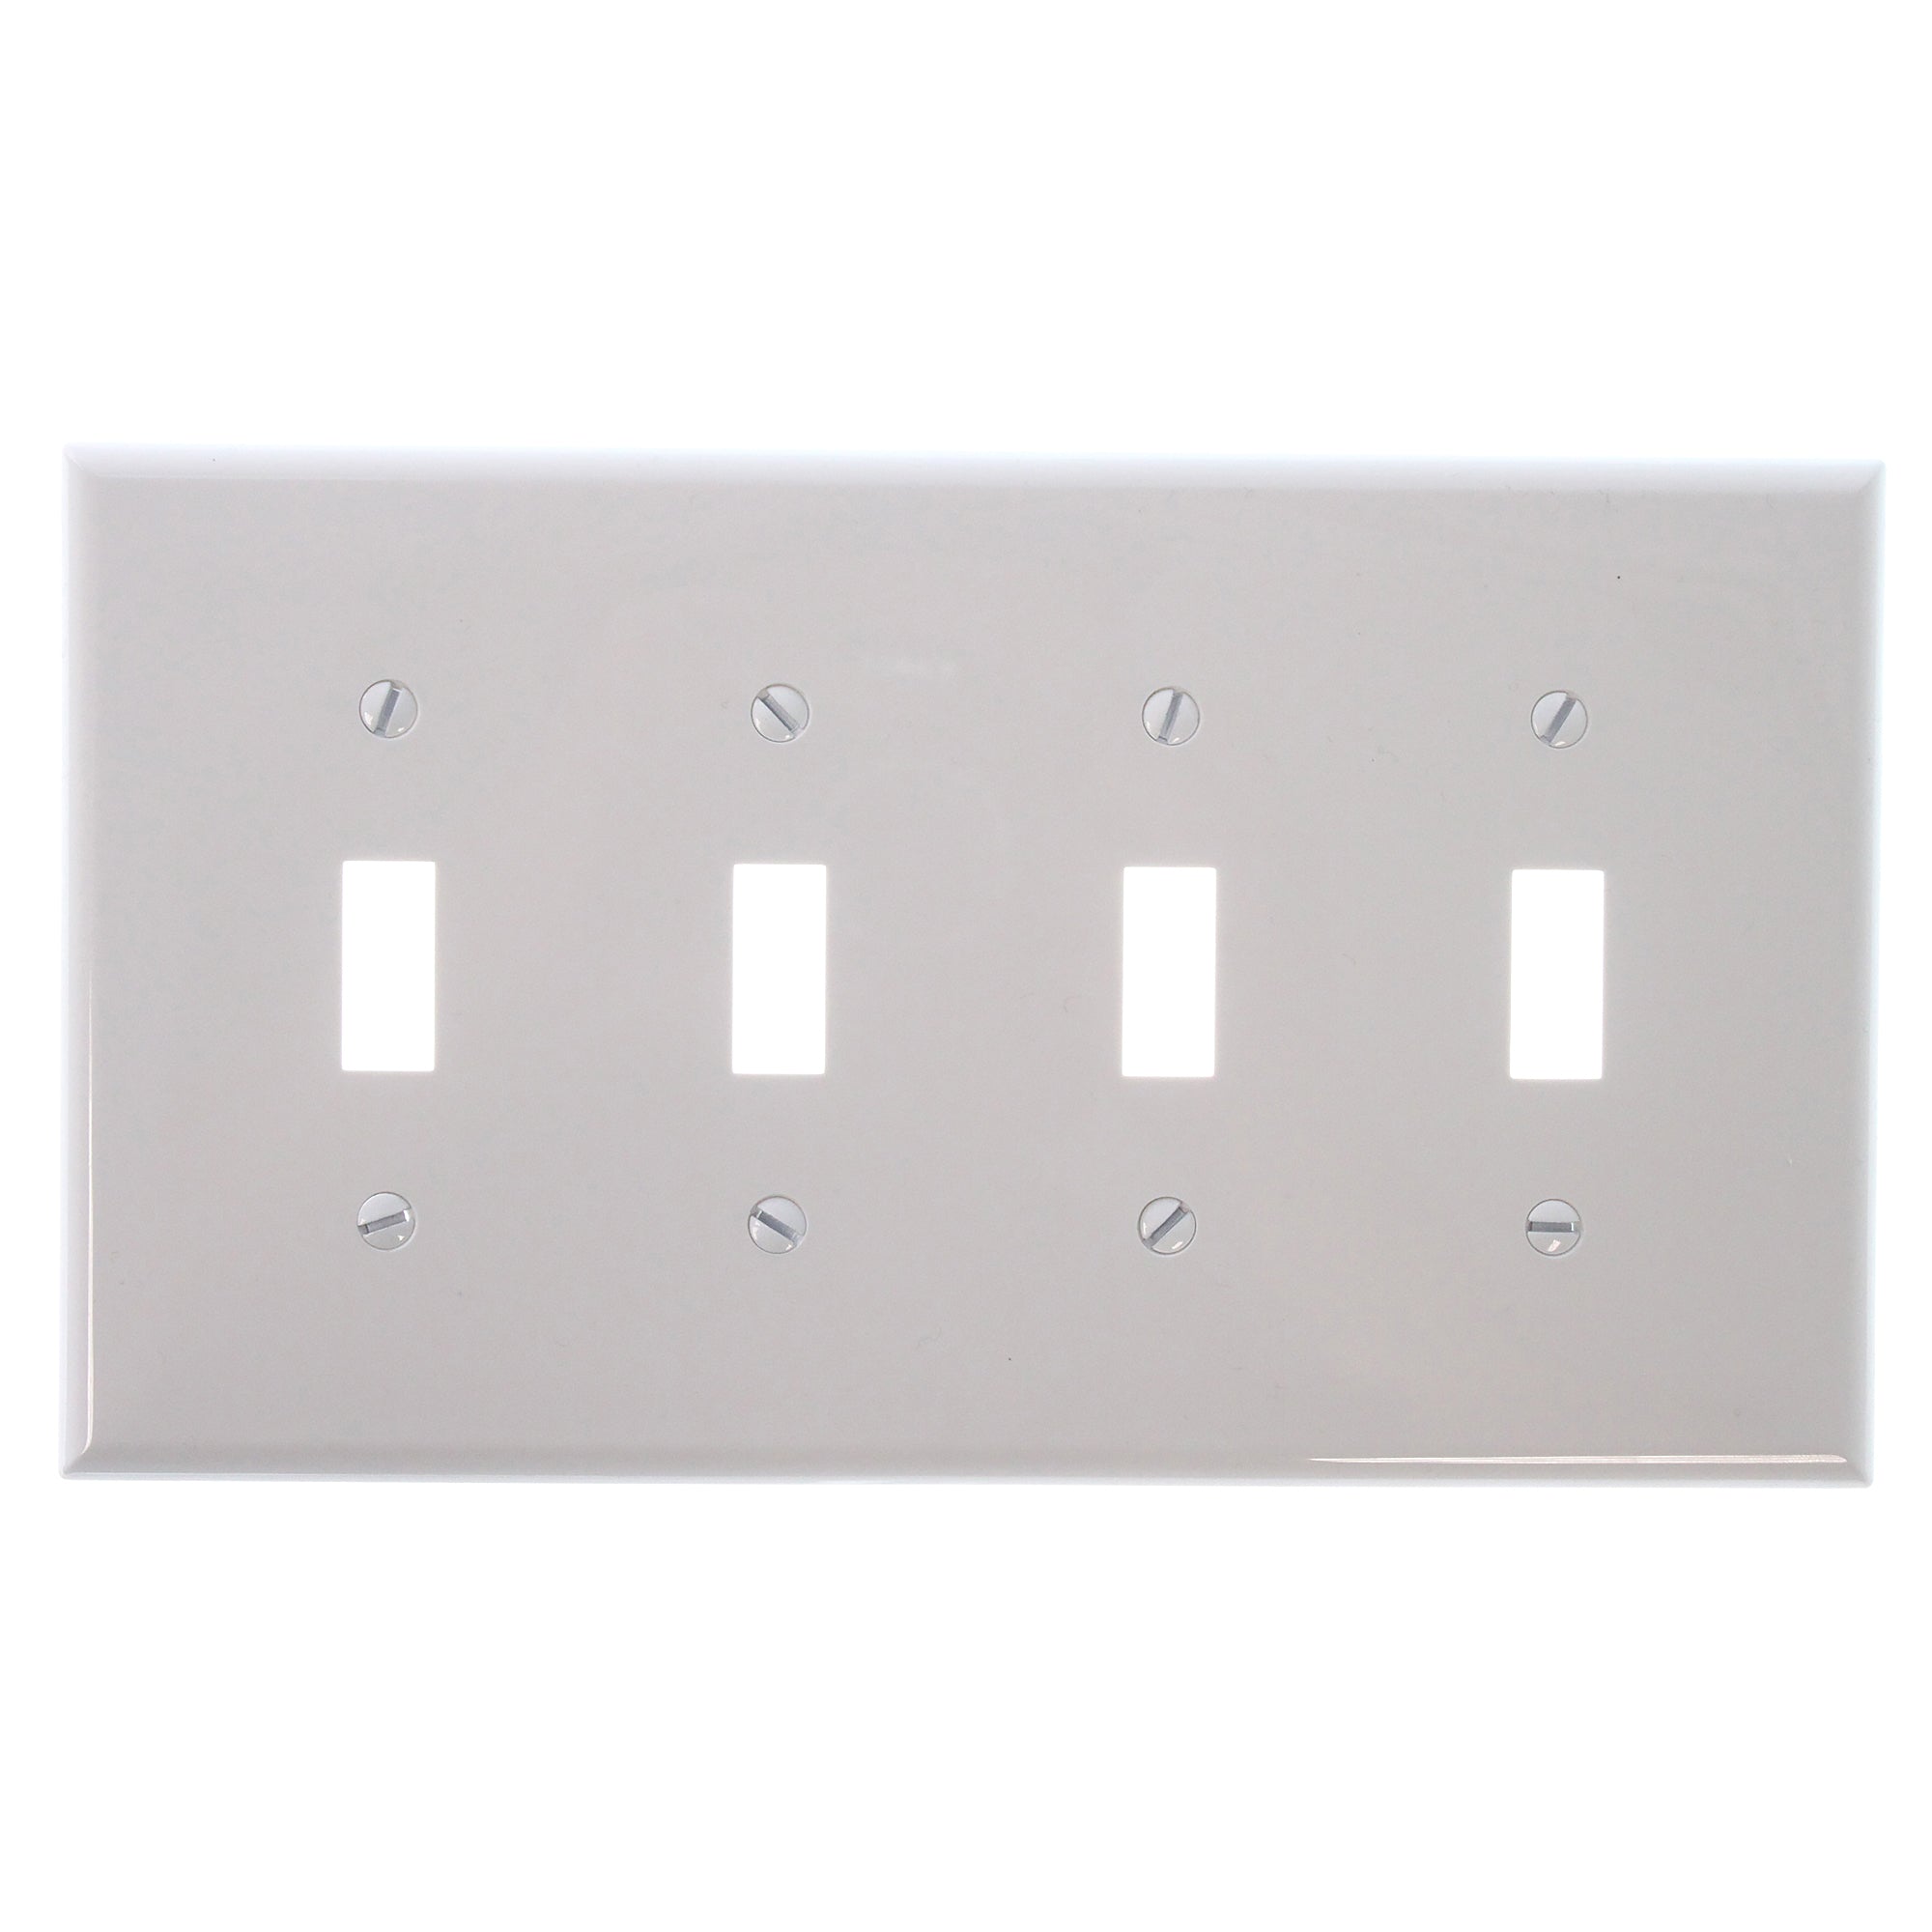 Cooper, COOPER PJ4W POLYCARBONATE 4-GANG TOGGLE SWITCH WALLPLATE, WHITE (10 PACK)